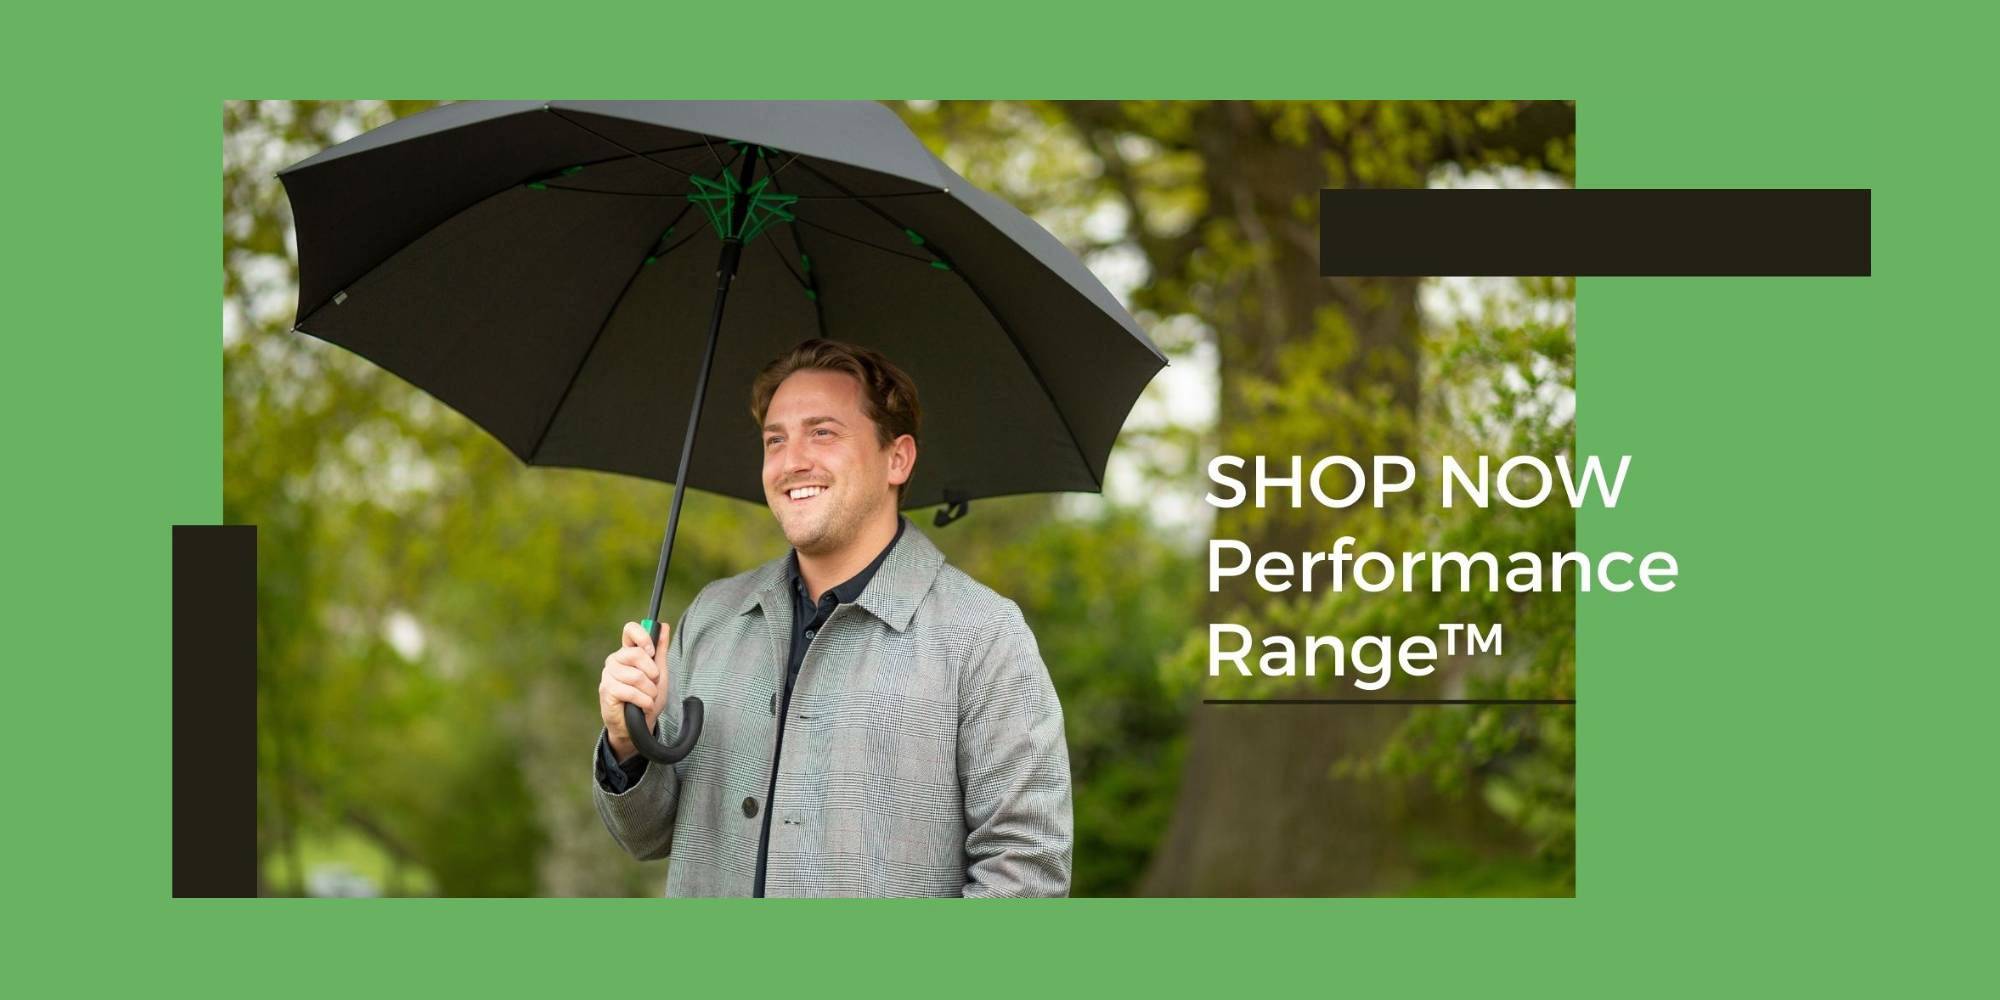 Performance Range - Strong & Windproof Umbrellas by Fulton